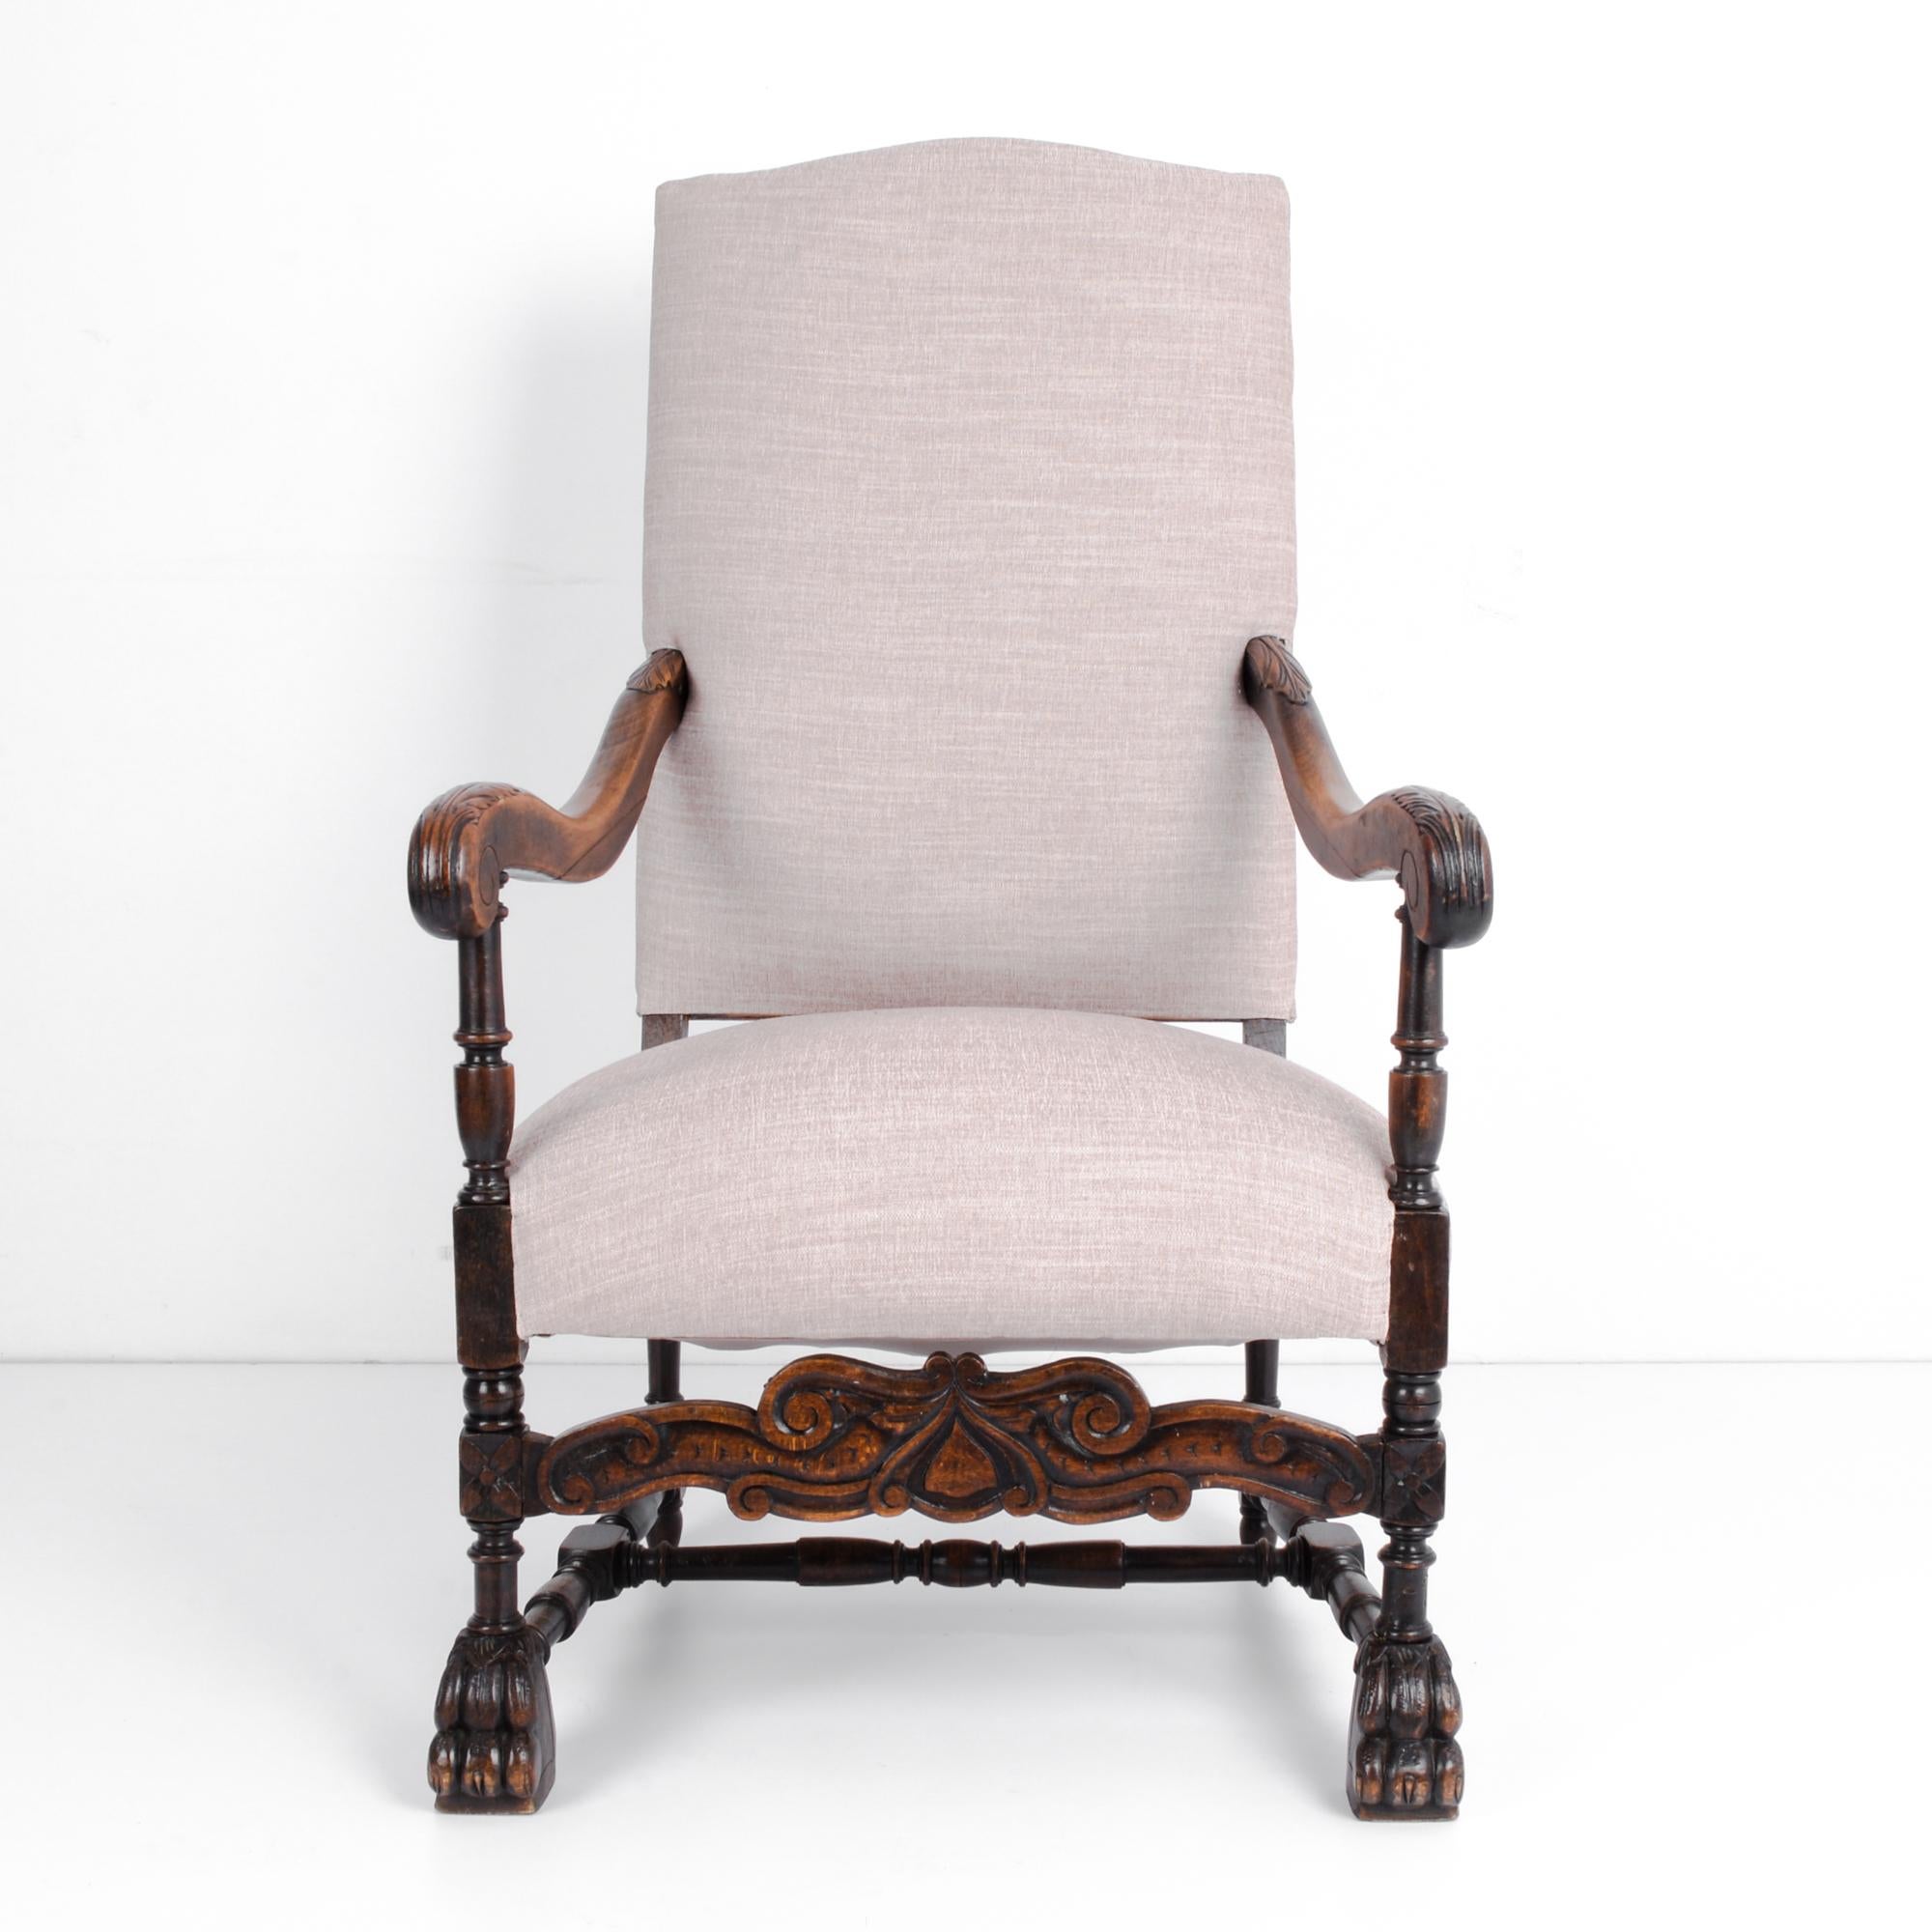 This wooden armchair was made in France, circa 1880. It has an upholstered and well-padded seat and back. The claw feet and intricate carvings on the front stretcher and armrests highlight the detailed care that has gone into this chair. The deep